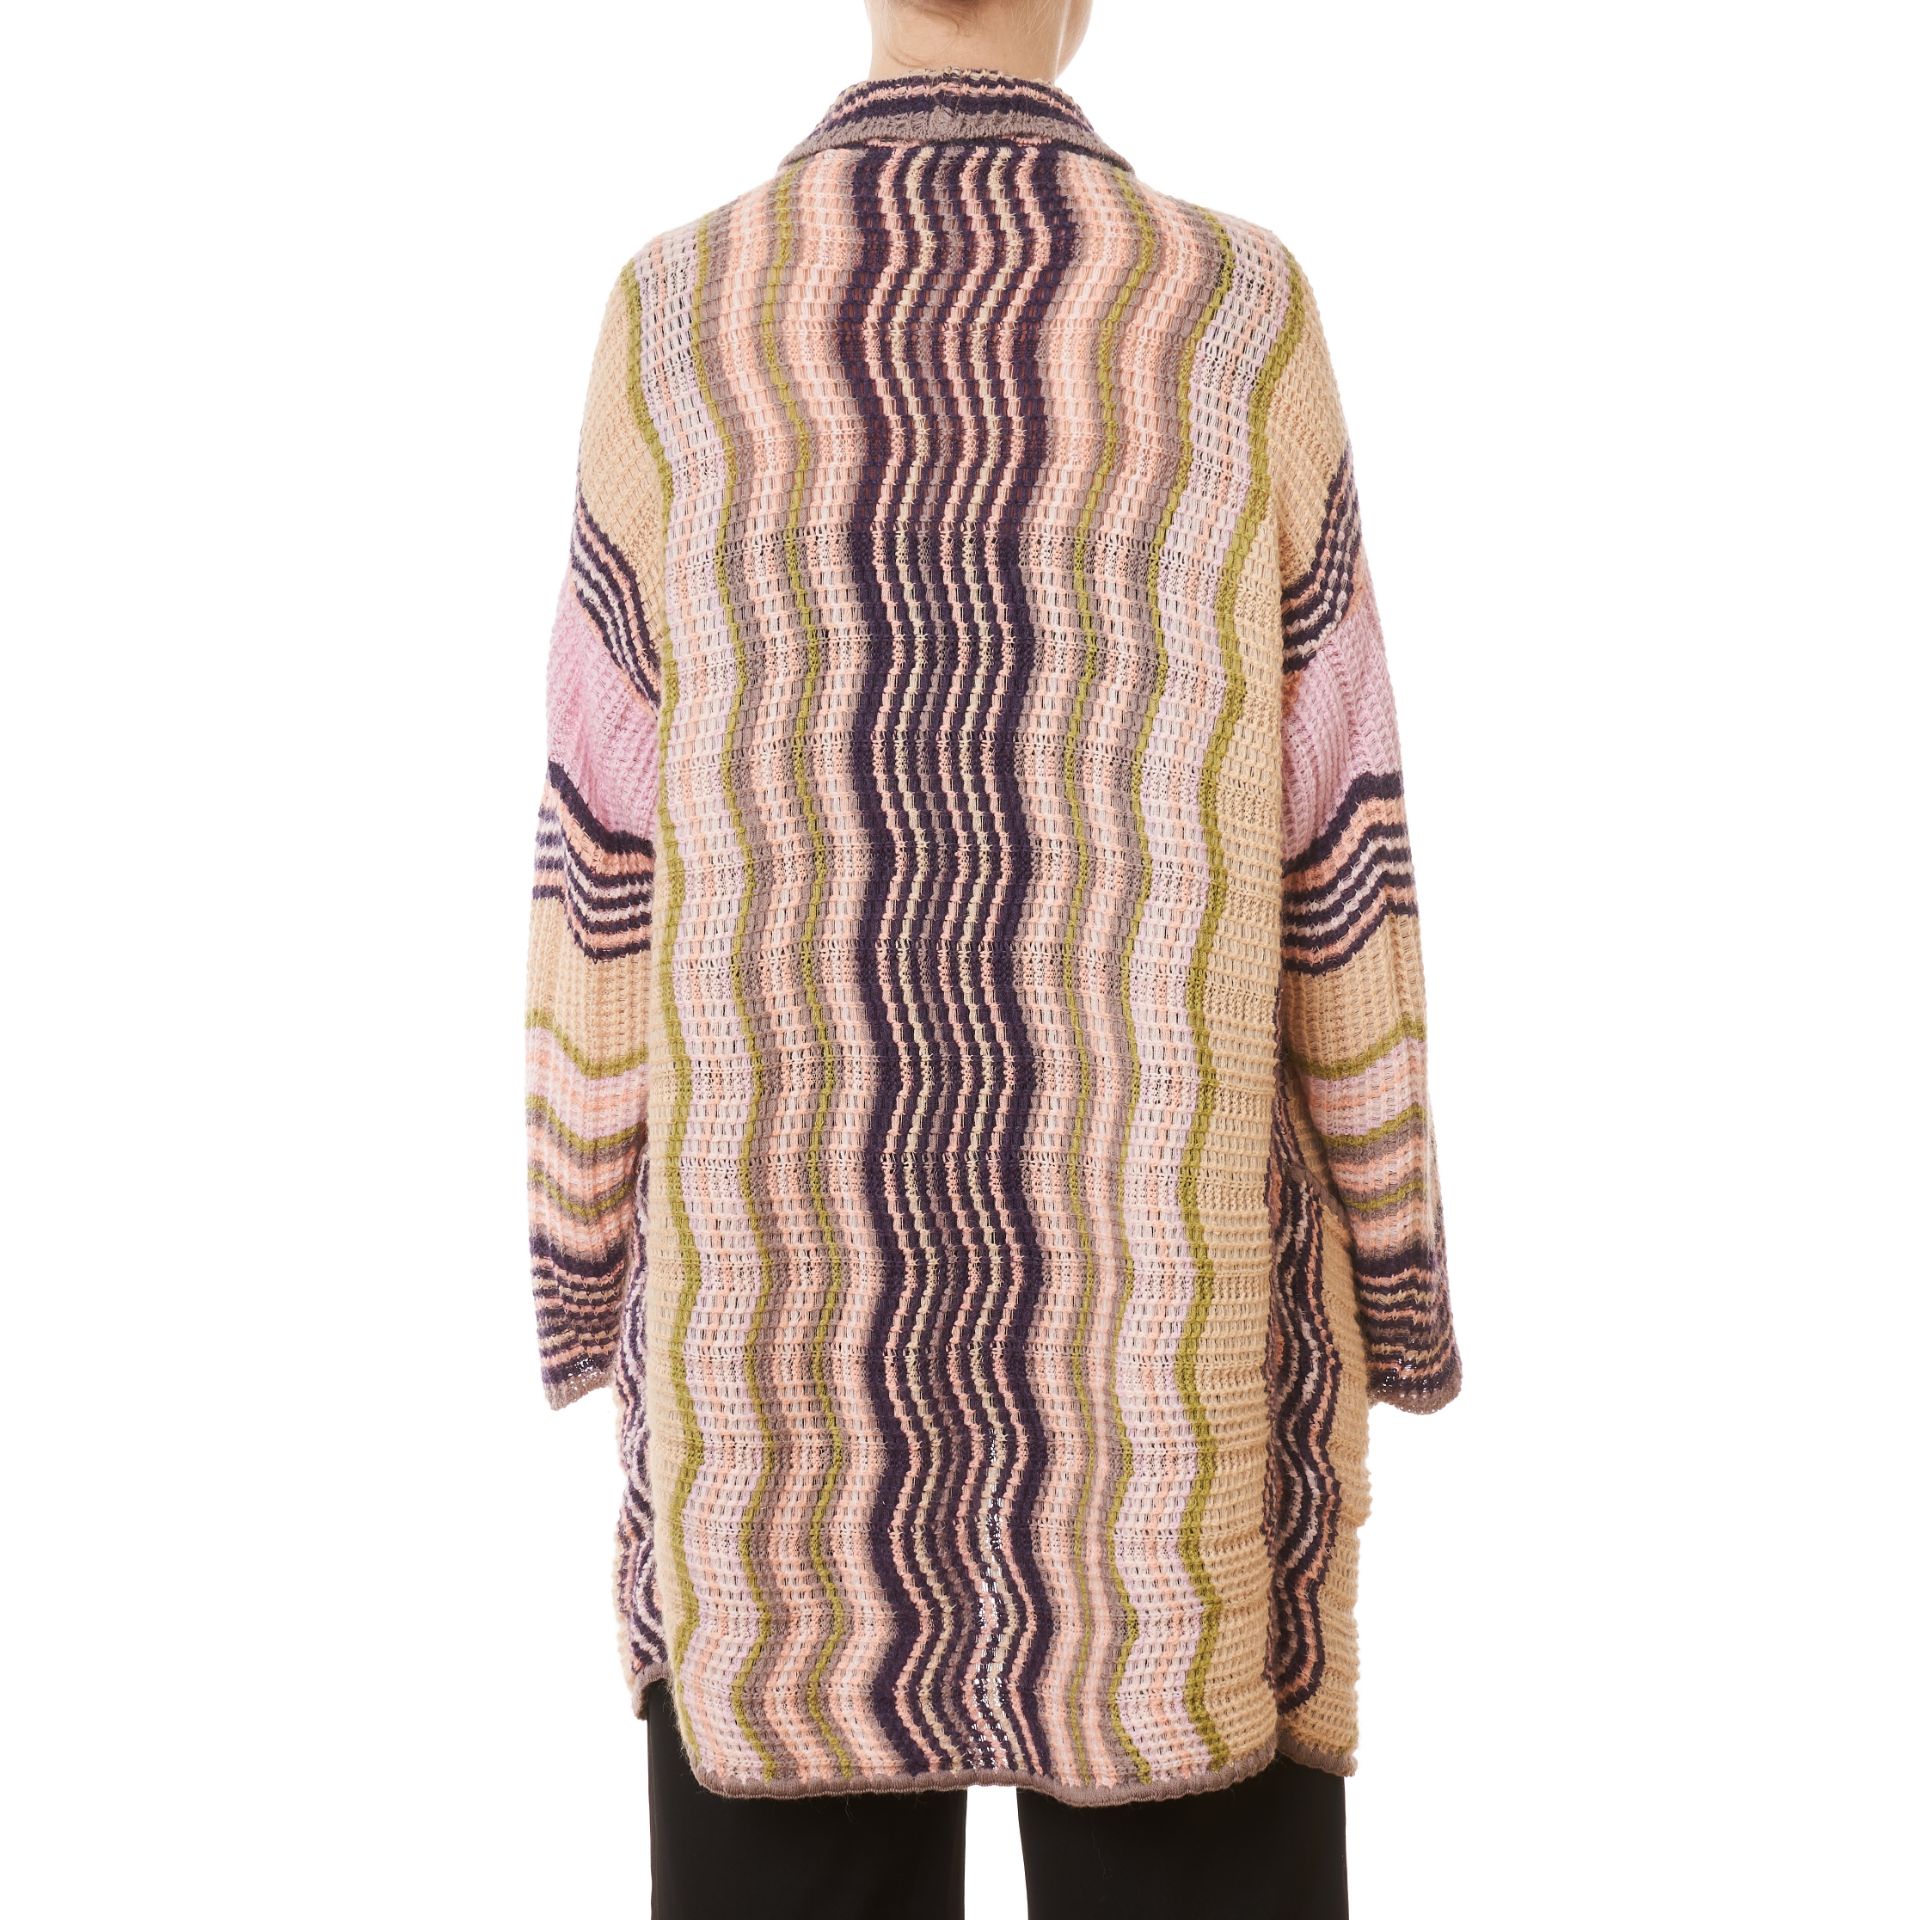 NO RESERVE TWO MISSONI LONG CARDIGANS - Image 4 of 8